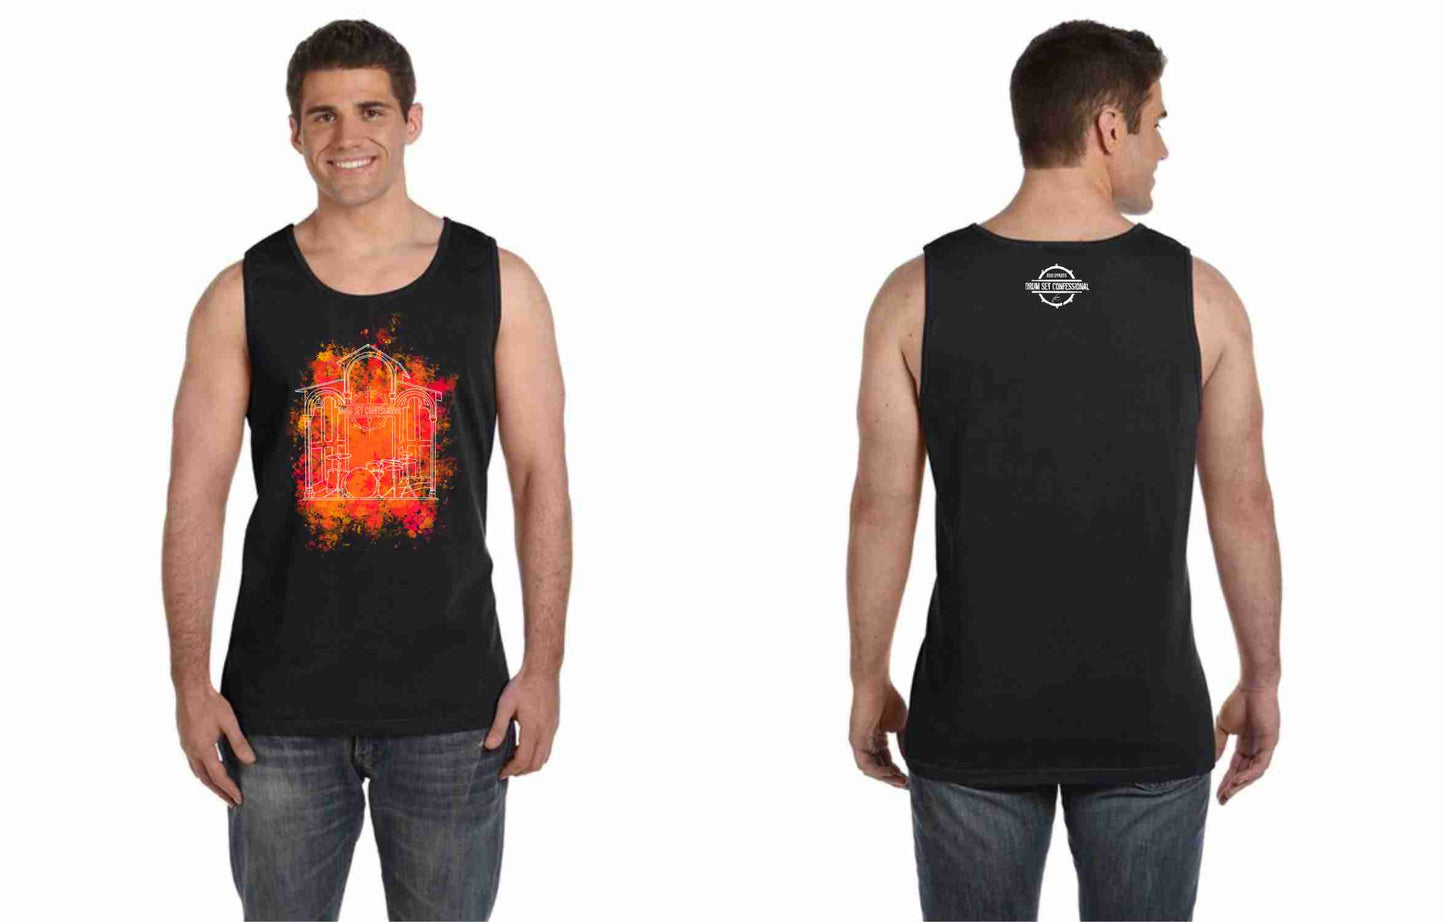 DSC "Confessional" Comfort Colors Adult Heavyweight Tank (100% of profits fuel outreach and donations to addiction/recovery causes.)